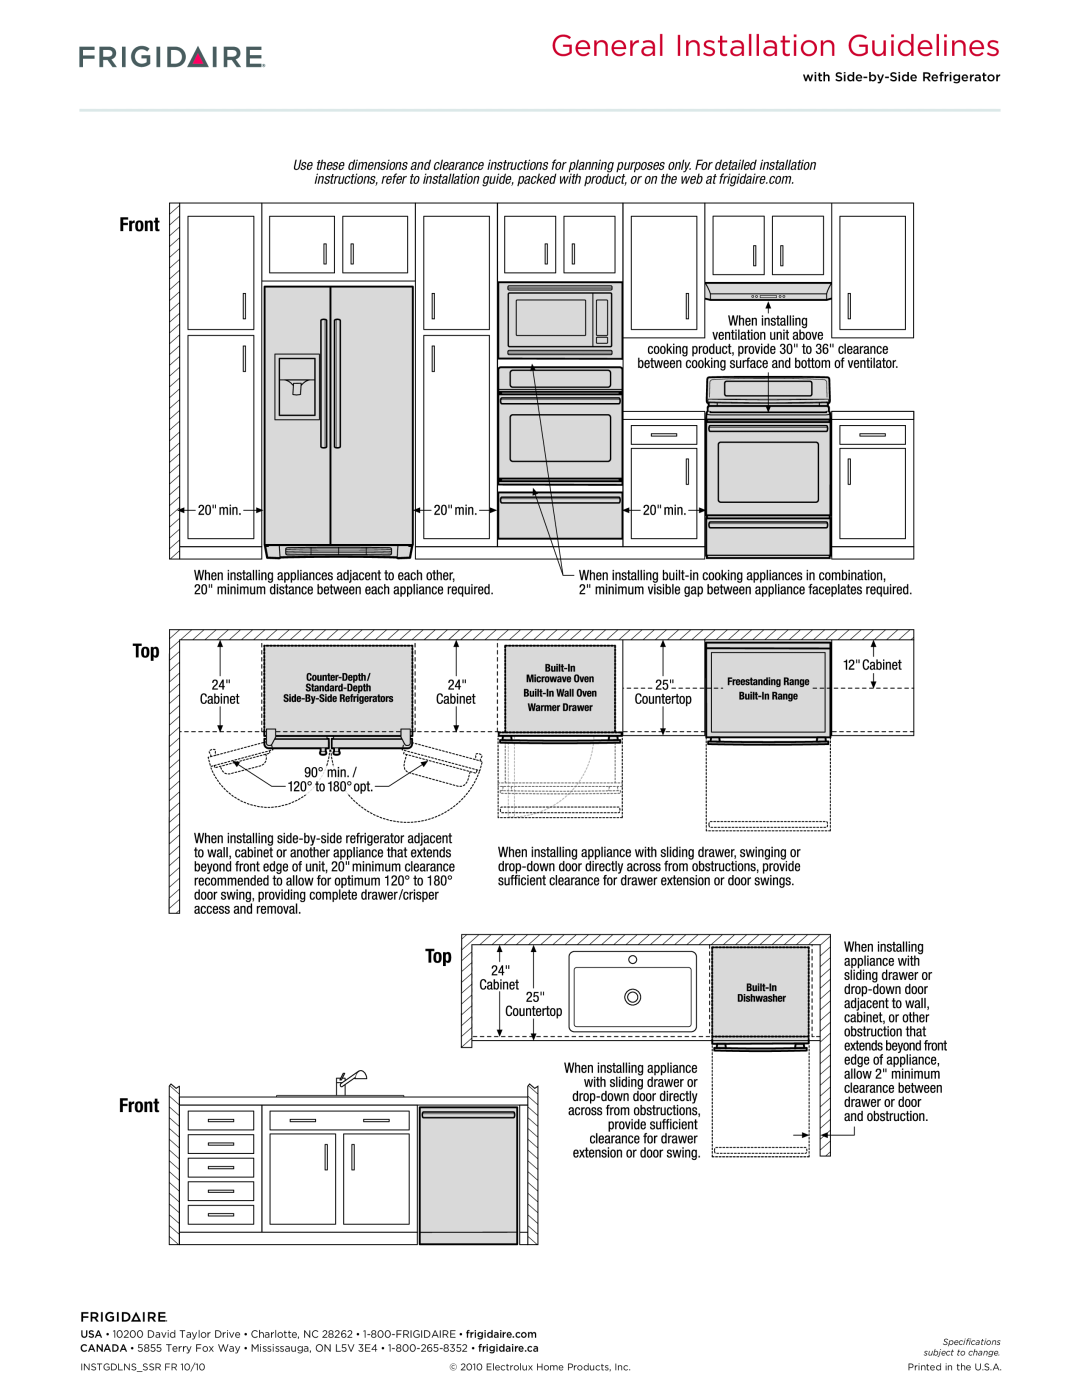 Frigidaire FFES3005L dimensions General Installation Guidelines, Top Front 